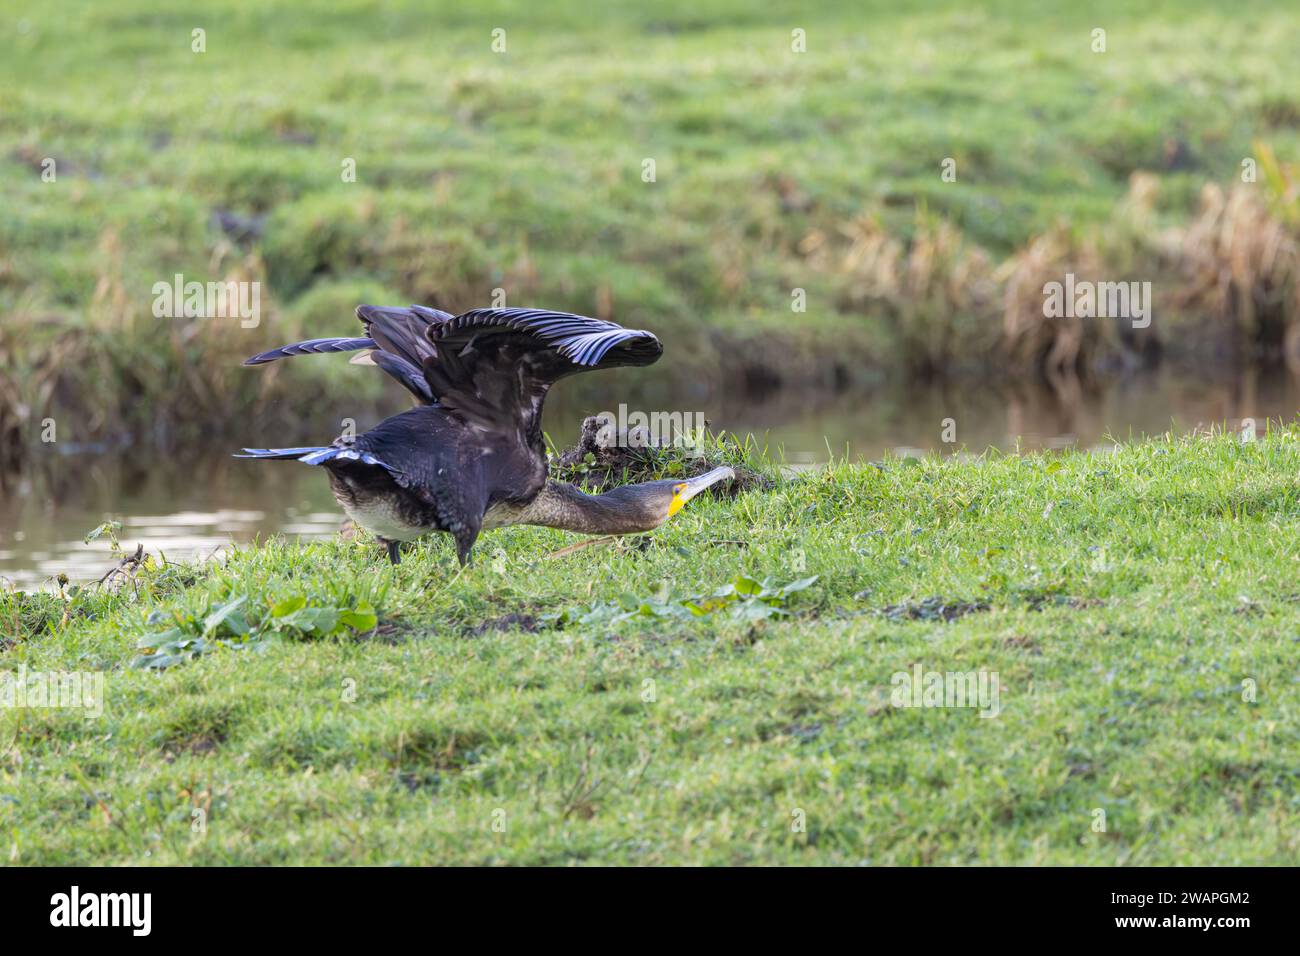 Cormorant in green grass with upright wings and extended neck ready to take flight Stock Photo